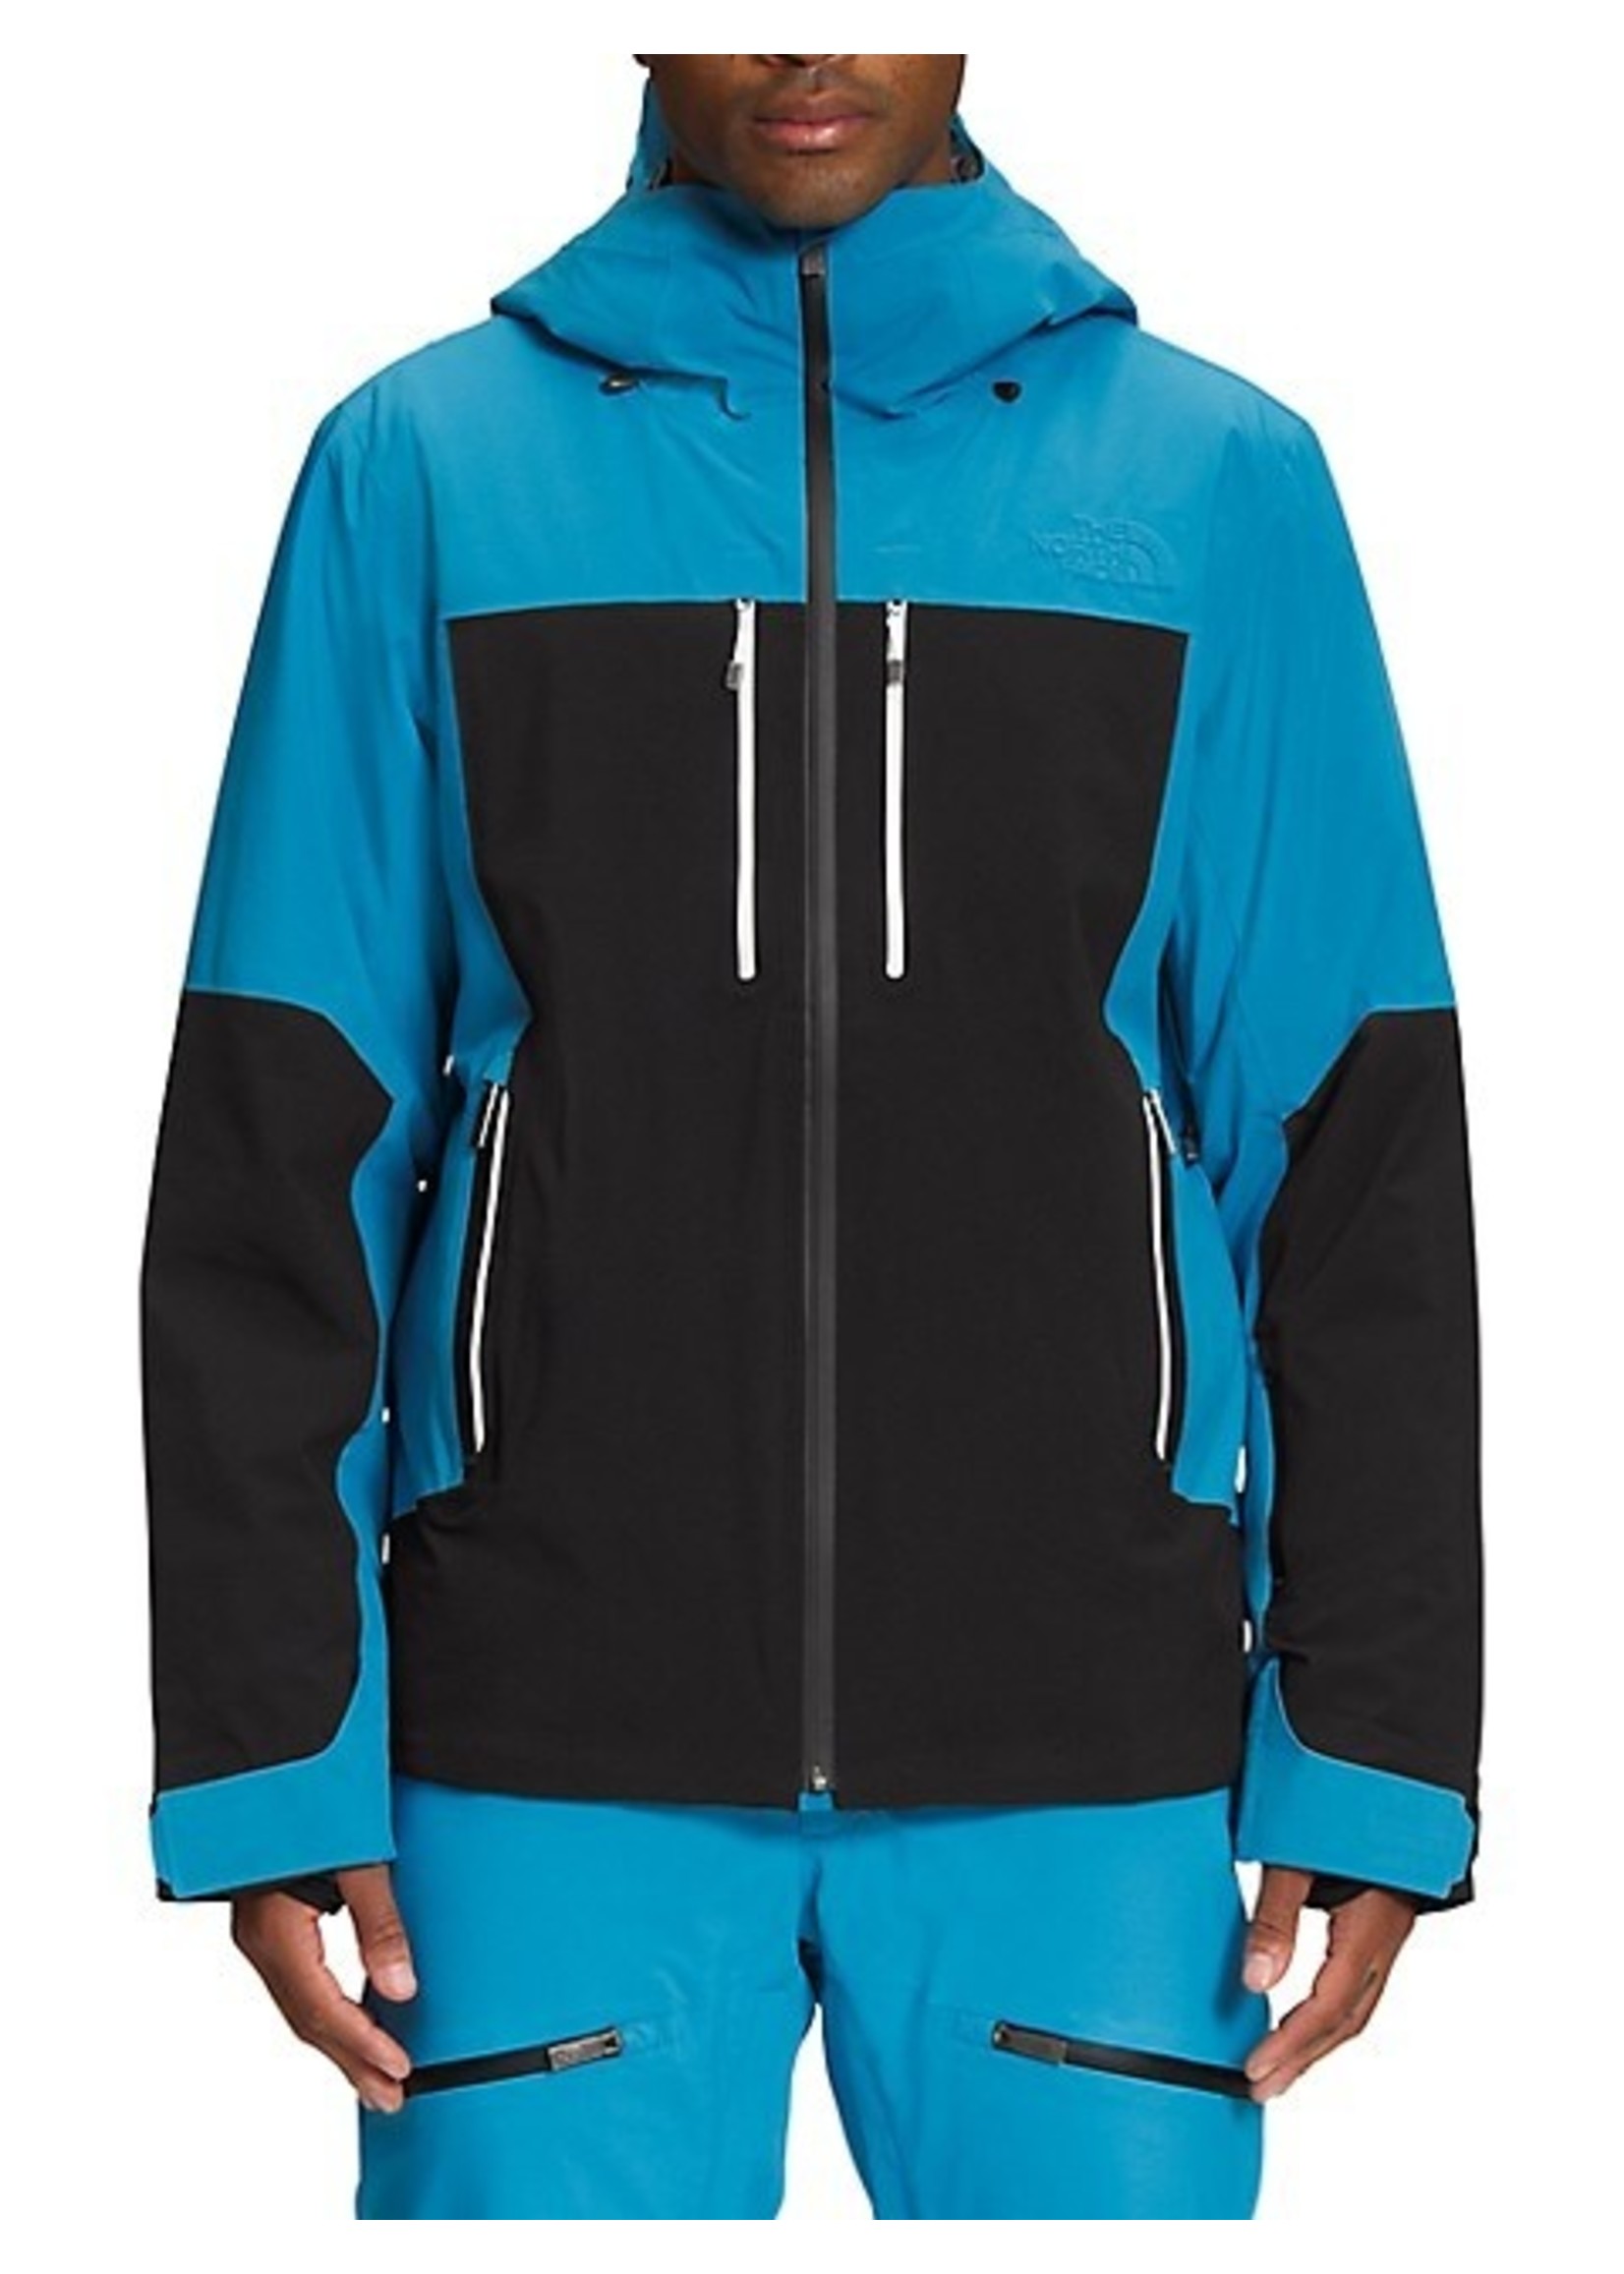 THE NORTH FACE M INCLINATION JACKET